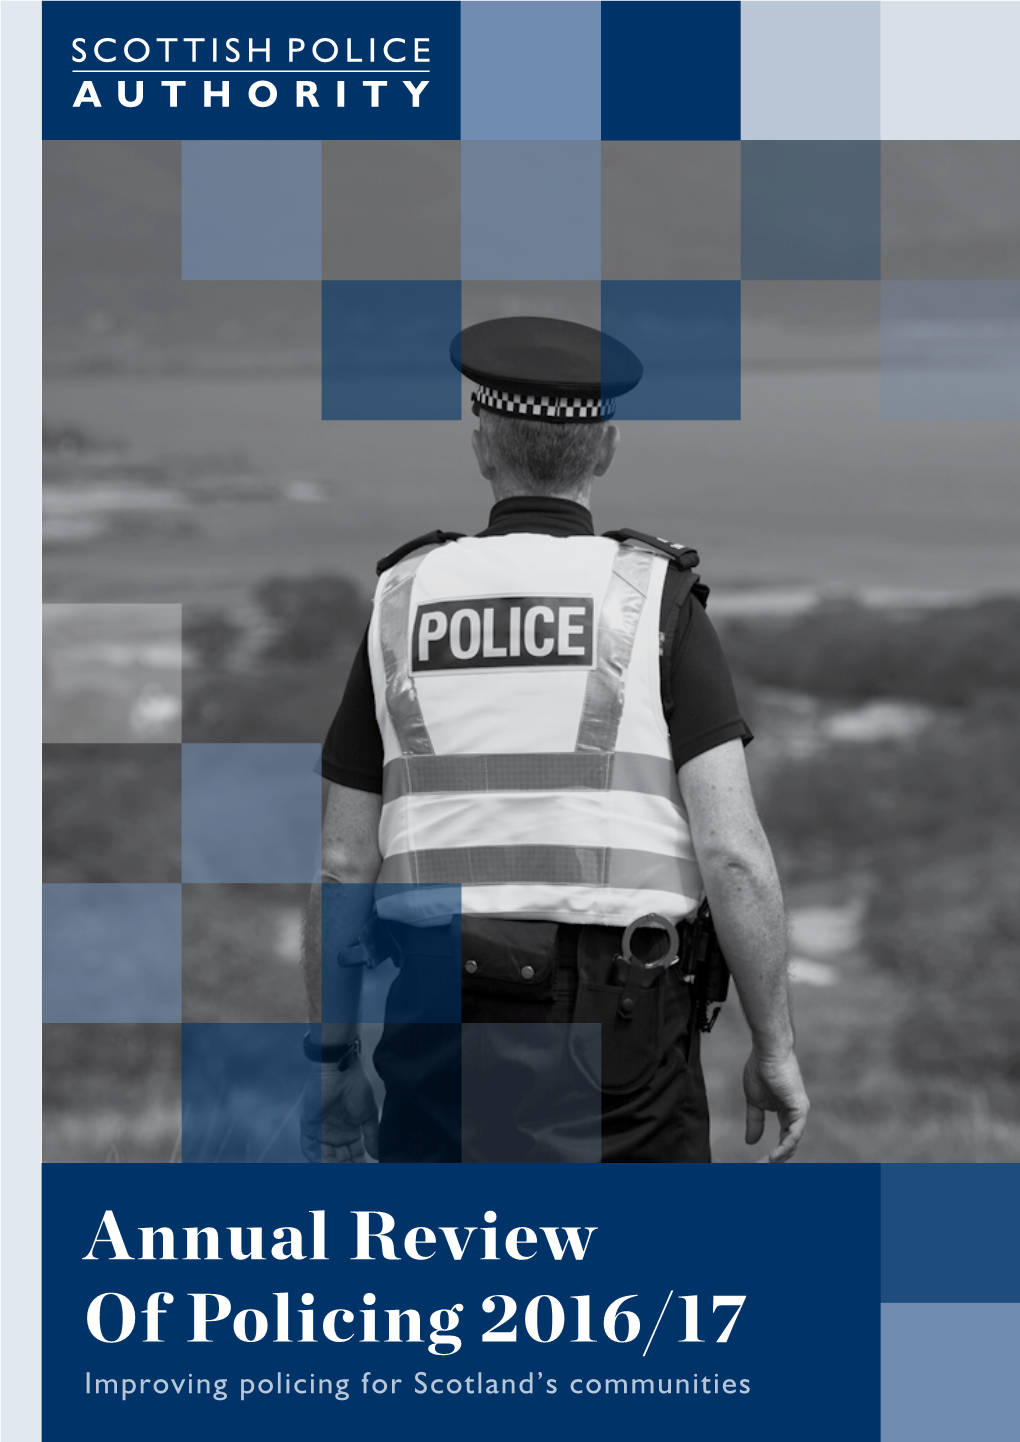 Annual Review of Policing 2016/17